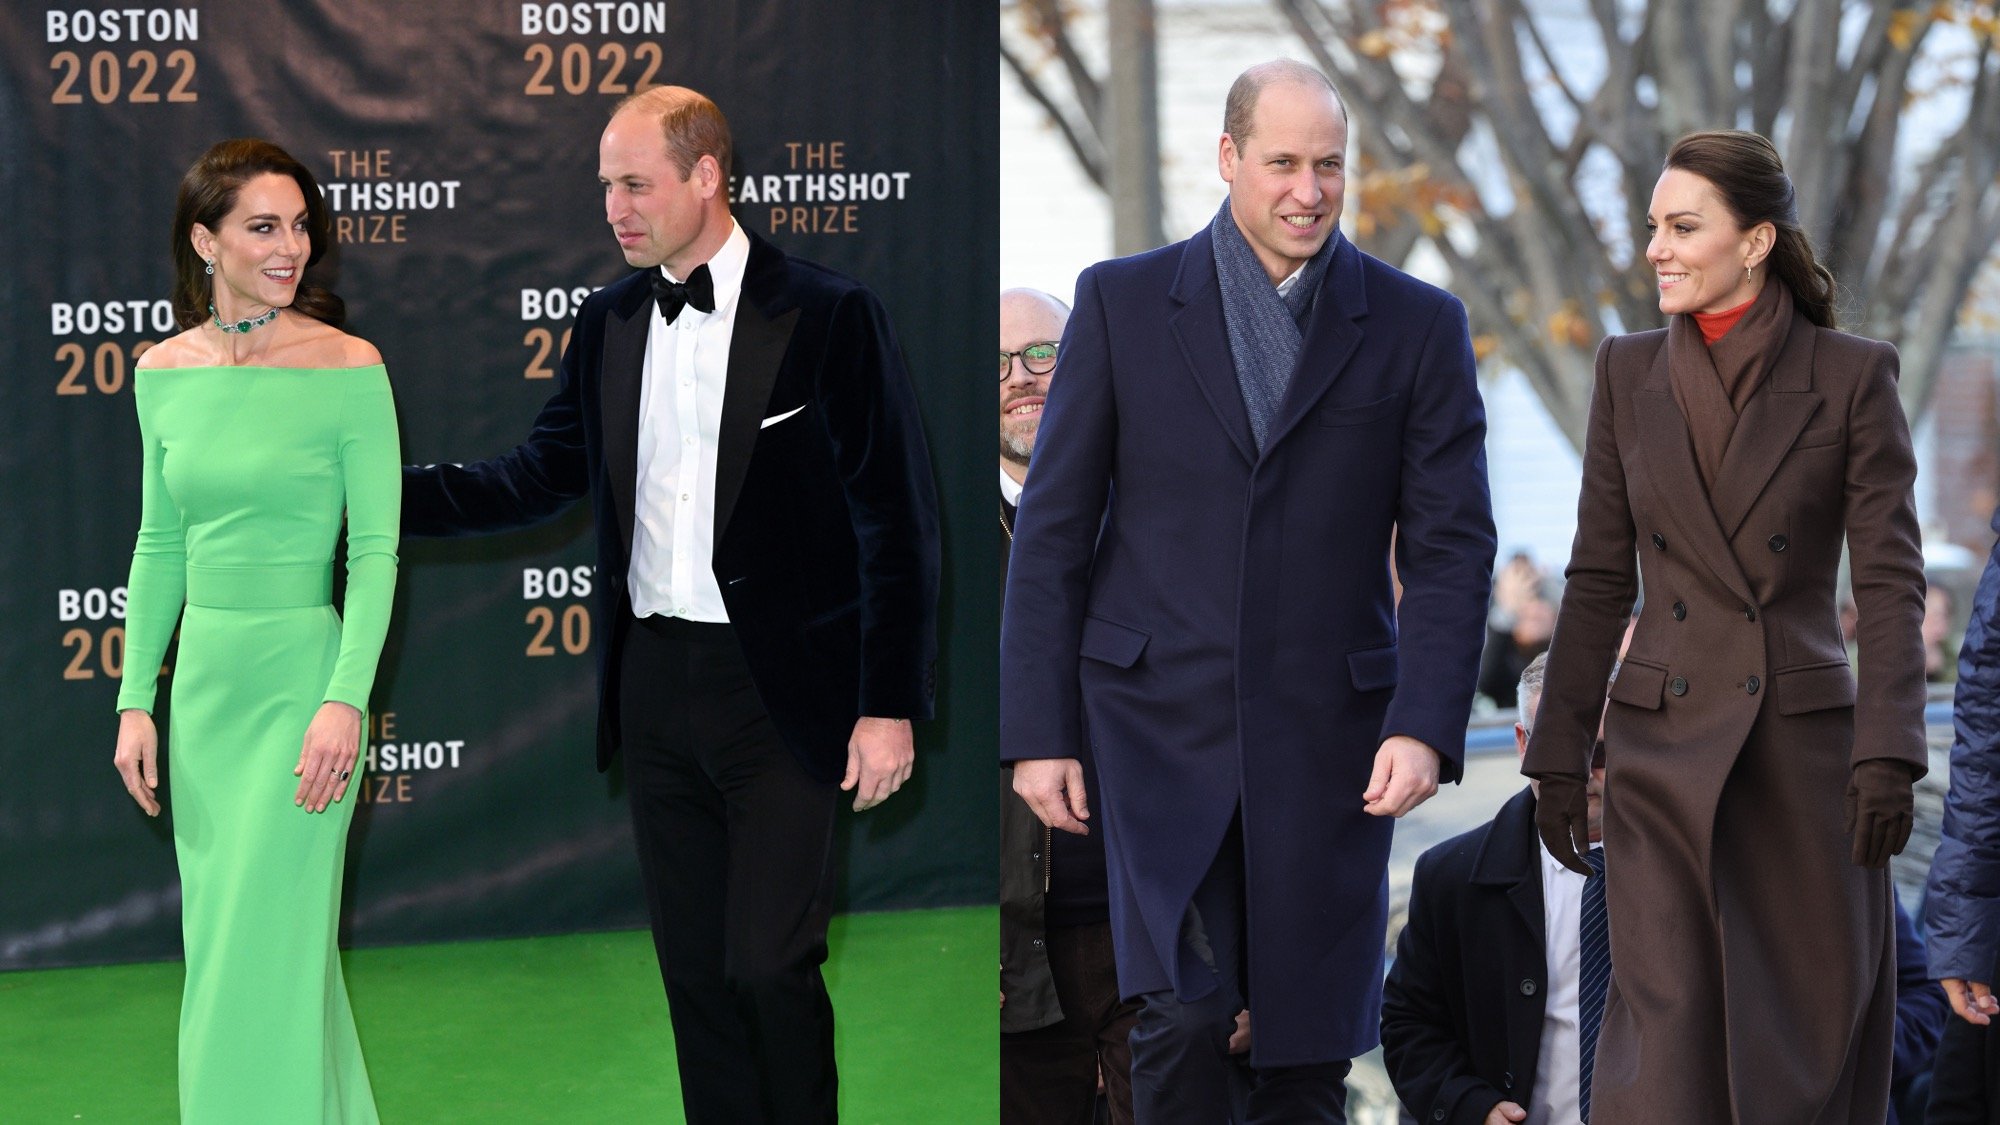 (L) Kate Middleton, Princess of Wales, and Prince William, Prince of Wales, attend The Earthshot Prize 2022 at MGM Music Hall at Fenway on December 02, 2022, in Boston, Massachusetts. (R) Prince William, Prince of Wales, and Kate Middleton, Princess of Wales, visit east Boston to see the changing face of Boston’s shoreline as the city contends with rising sea levels on December 01, 2022, in Boston, Massachusetts.